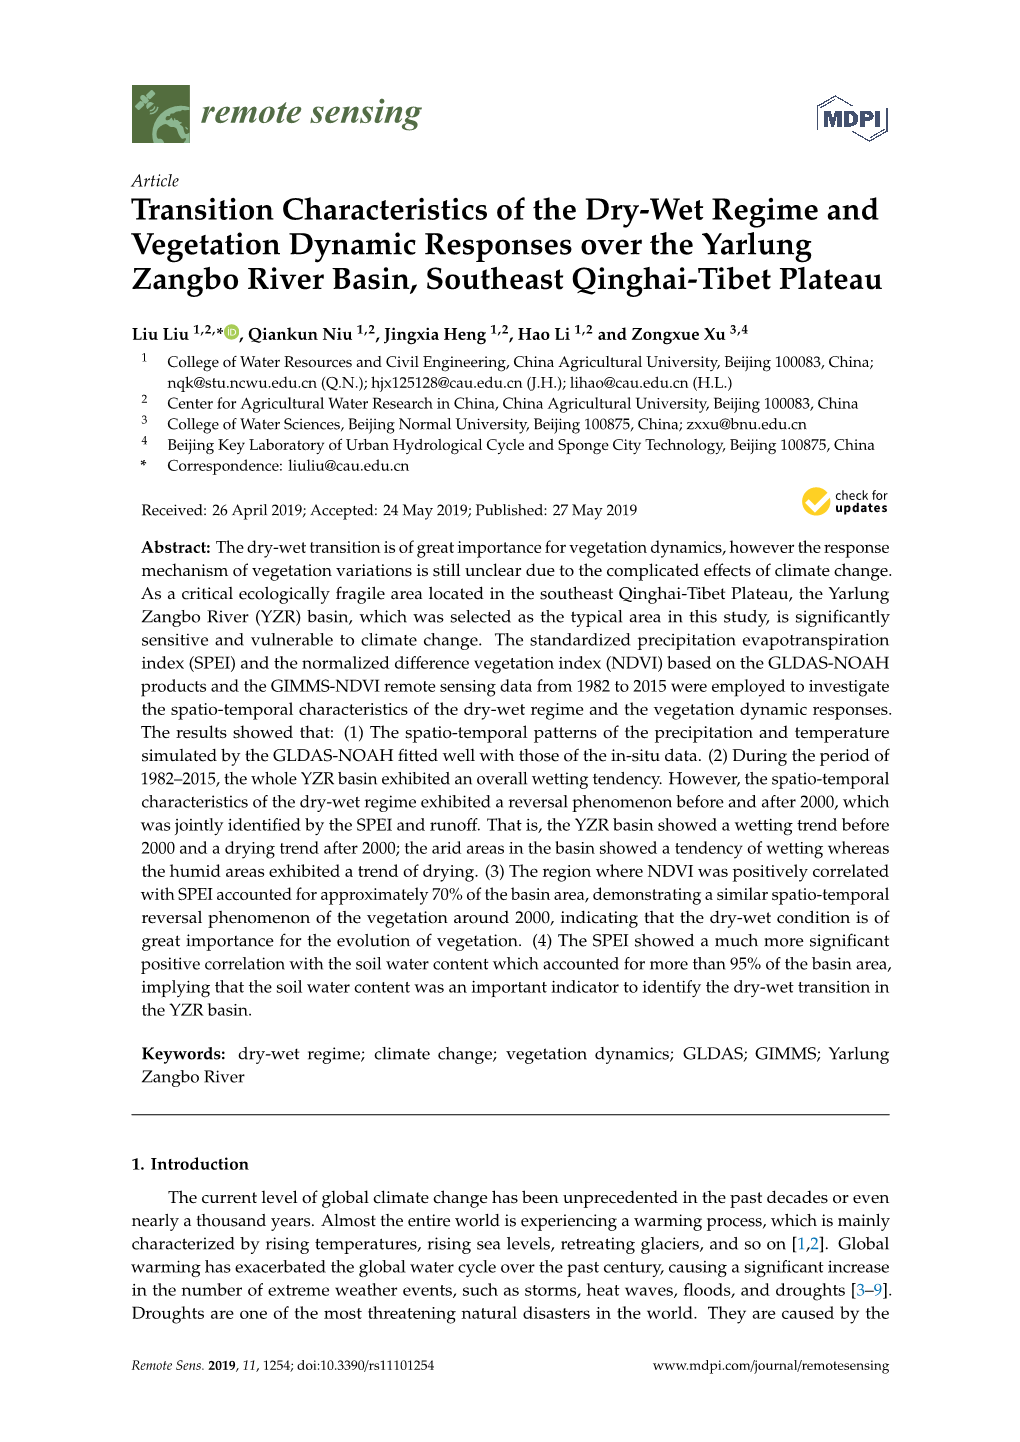 Transition Characteristics of the Dry-Wet Regime and Vegetation Dynamic Responses Over the Yarlung Zangbo River Basin, Southeast Qinghai-Tibet Plateau